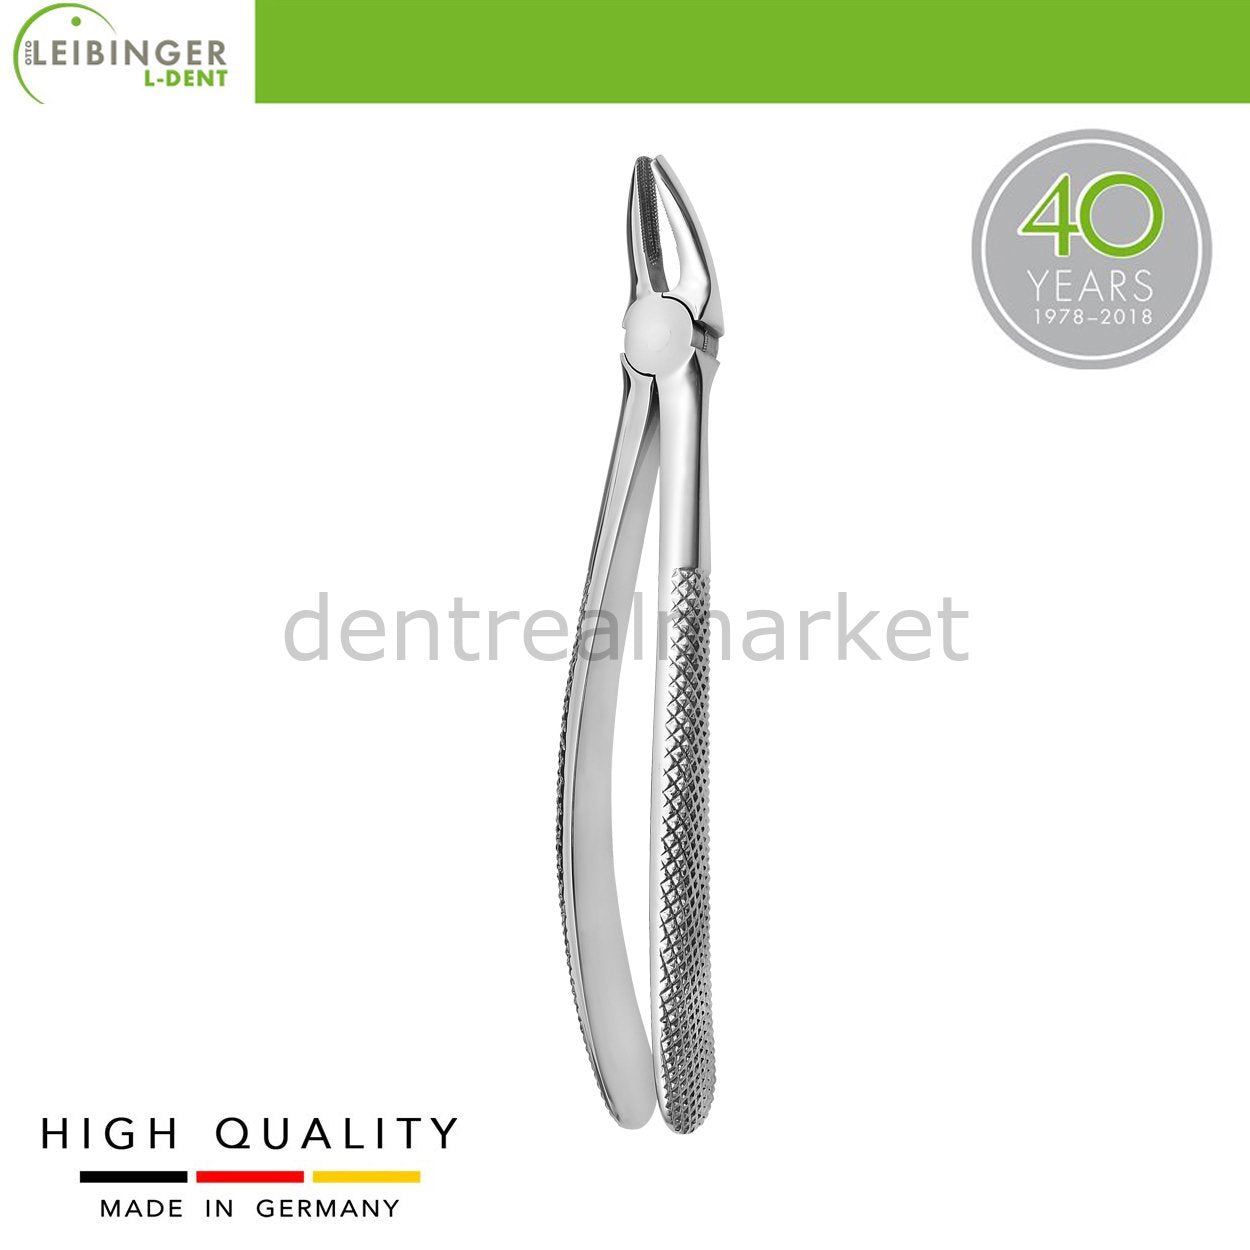 DentrealStore - Leibinger Adult Extracting Forceps 7 - Forceps for Upper Root and Bicuspid